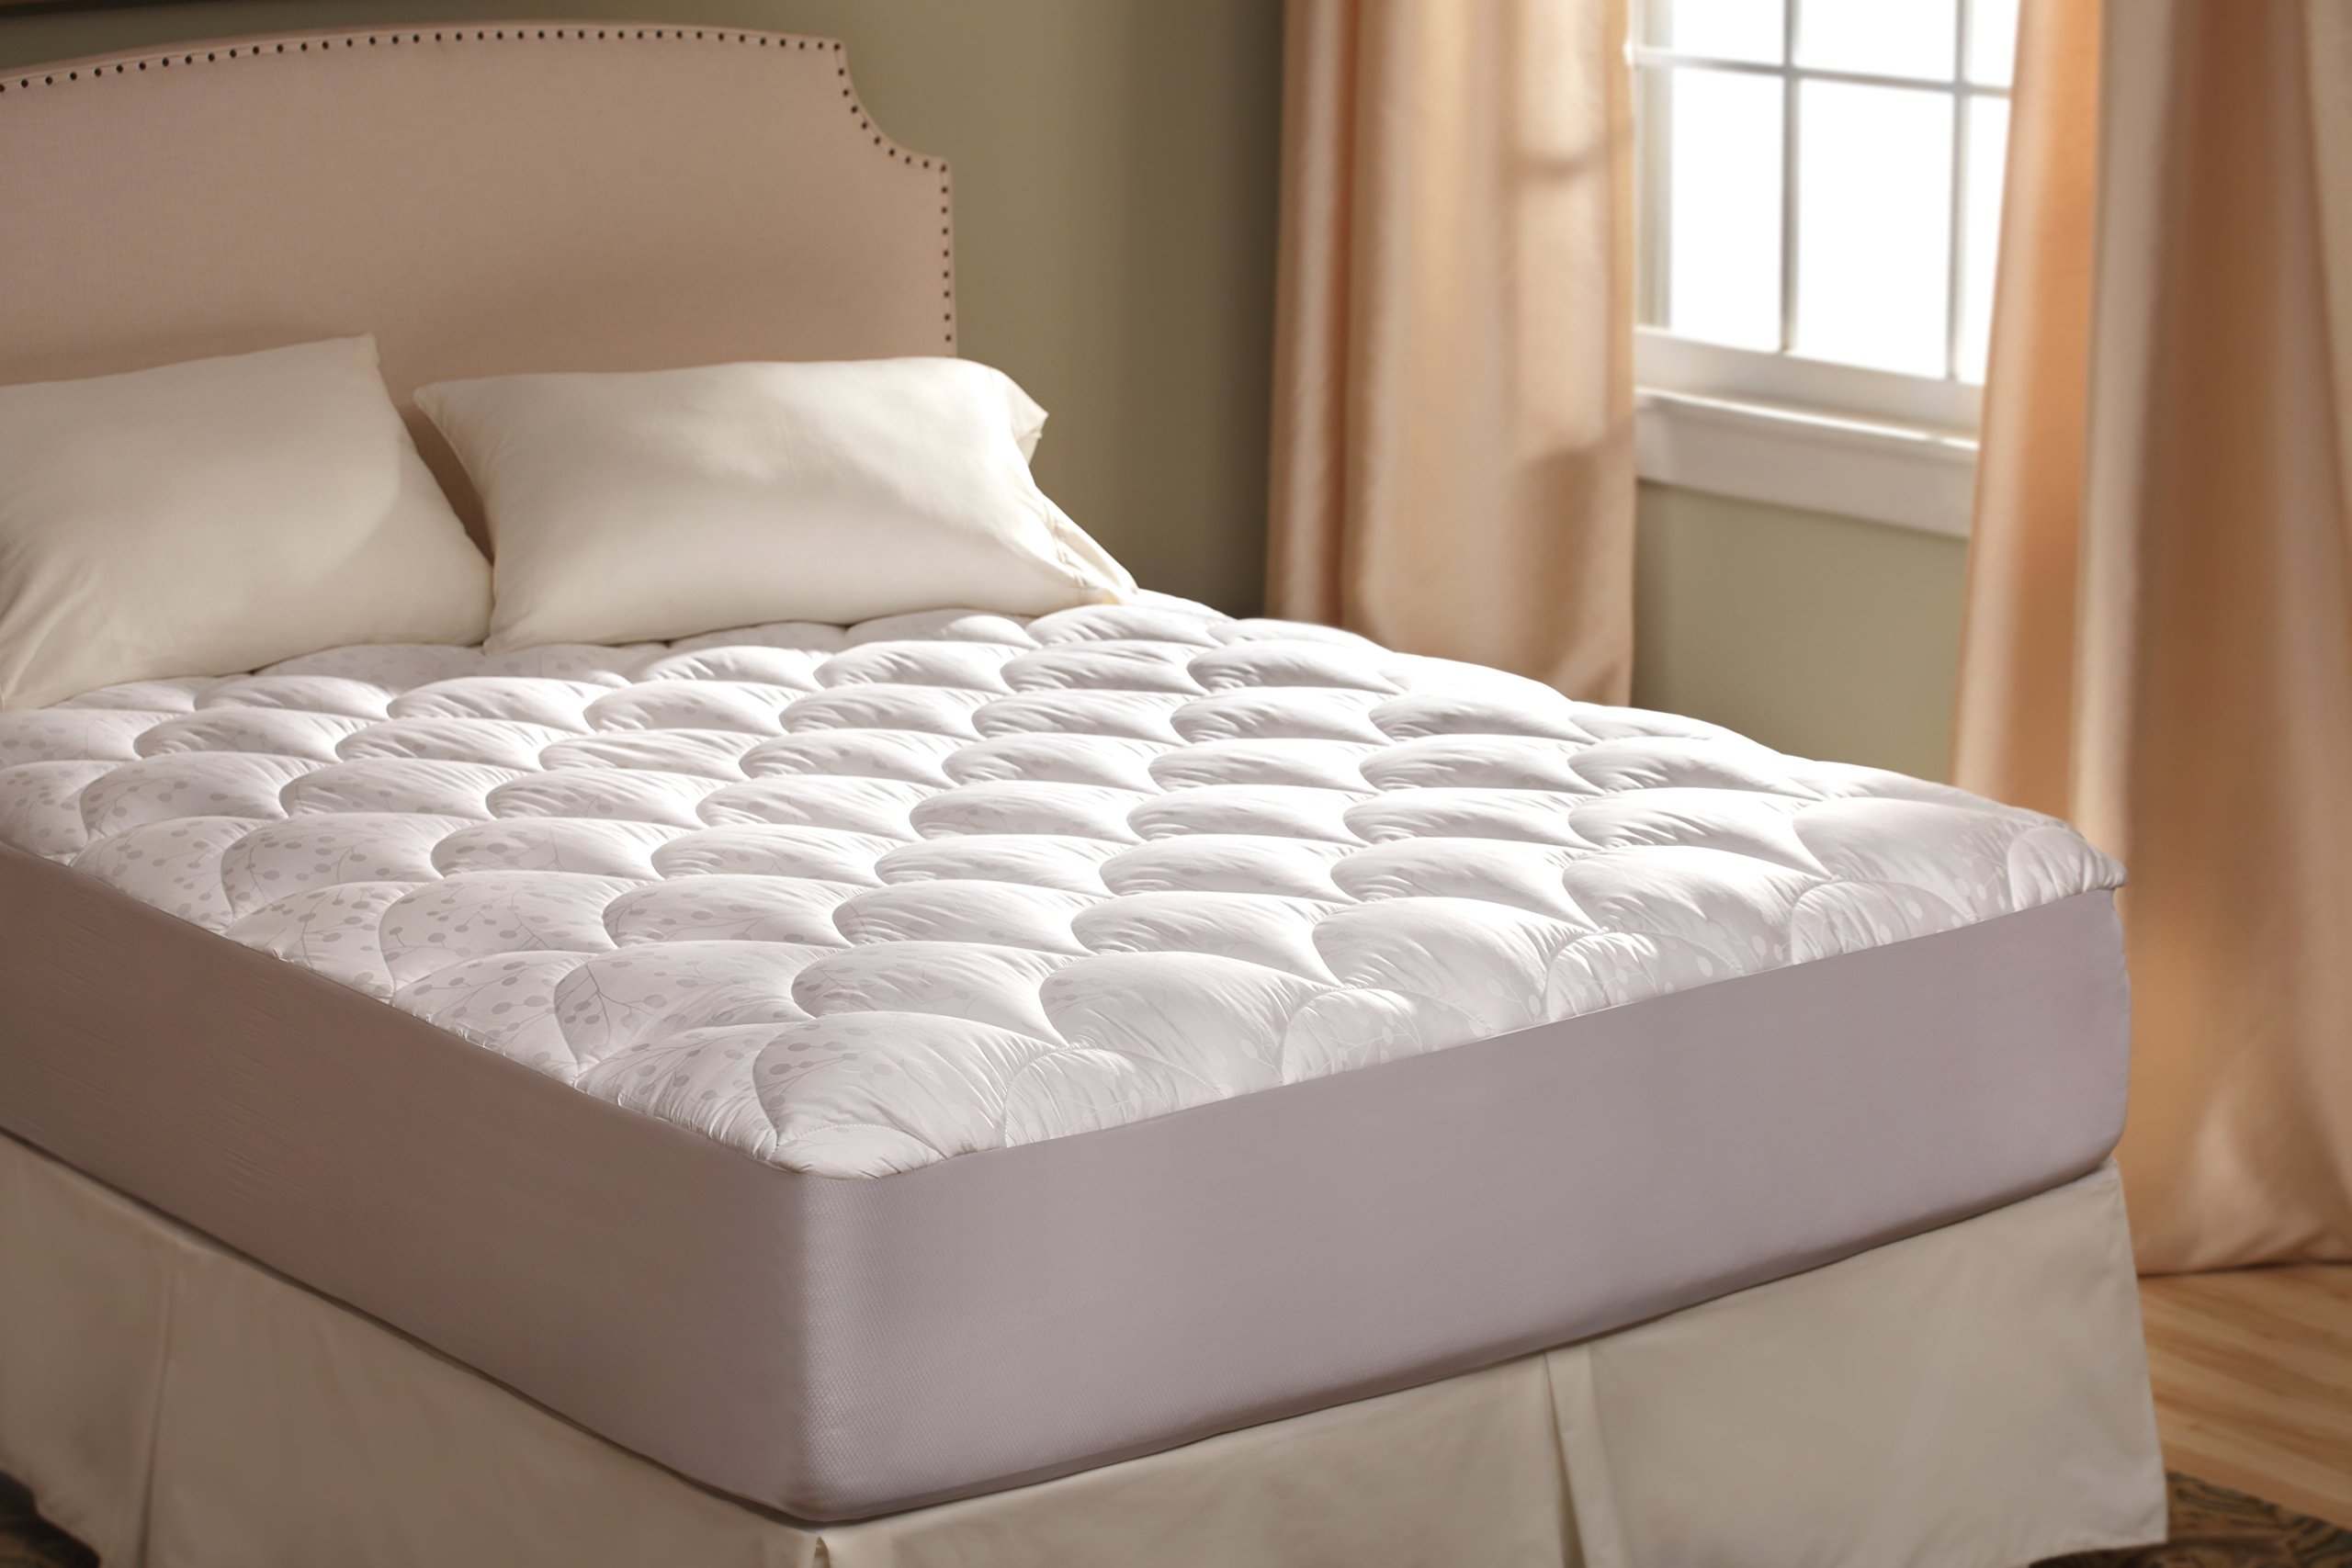 Denver 326390 Queen Size RV Supreme Euro Top Mattress with Radius Corners White- Top 10 Most Comfortable Mattresses to Use